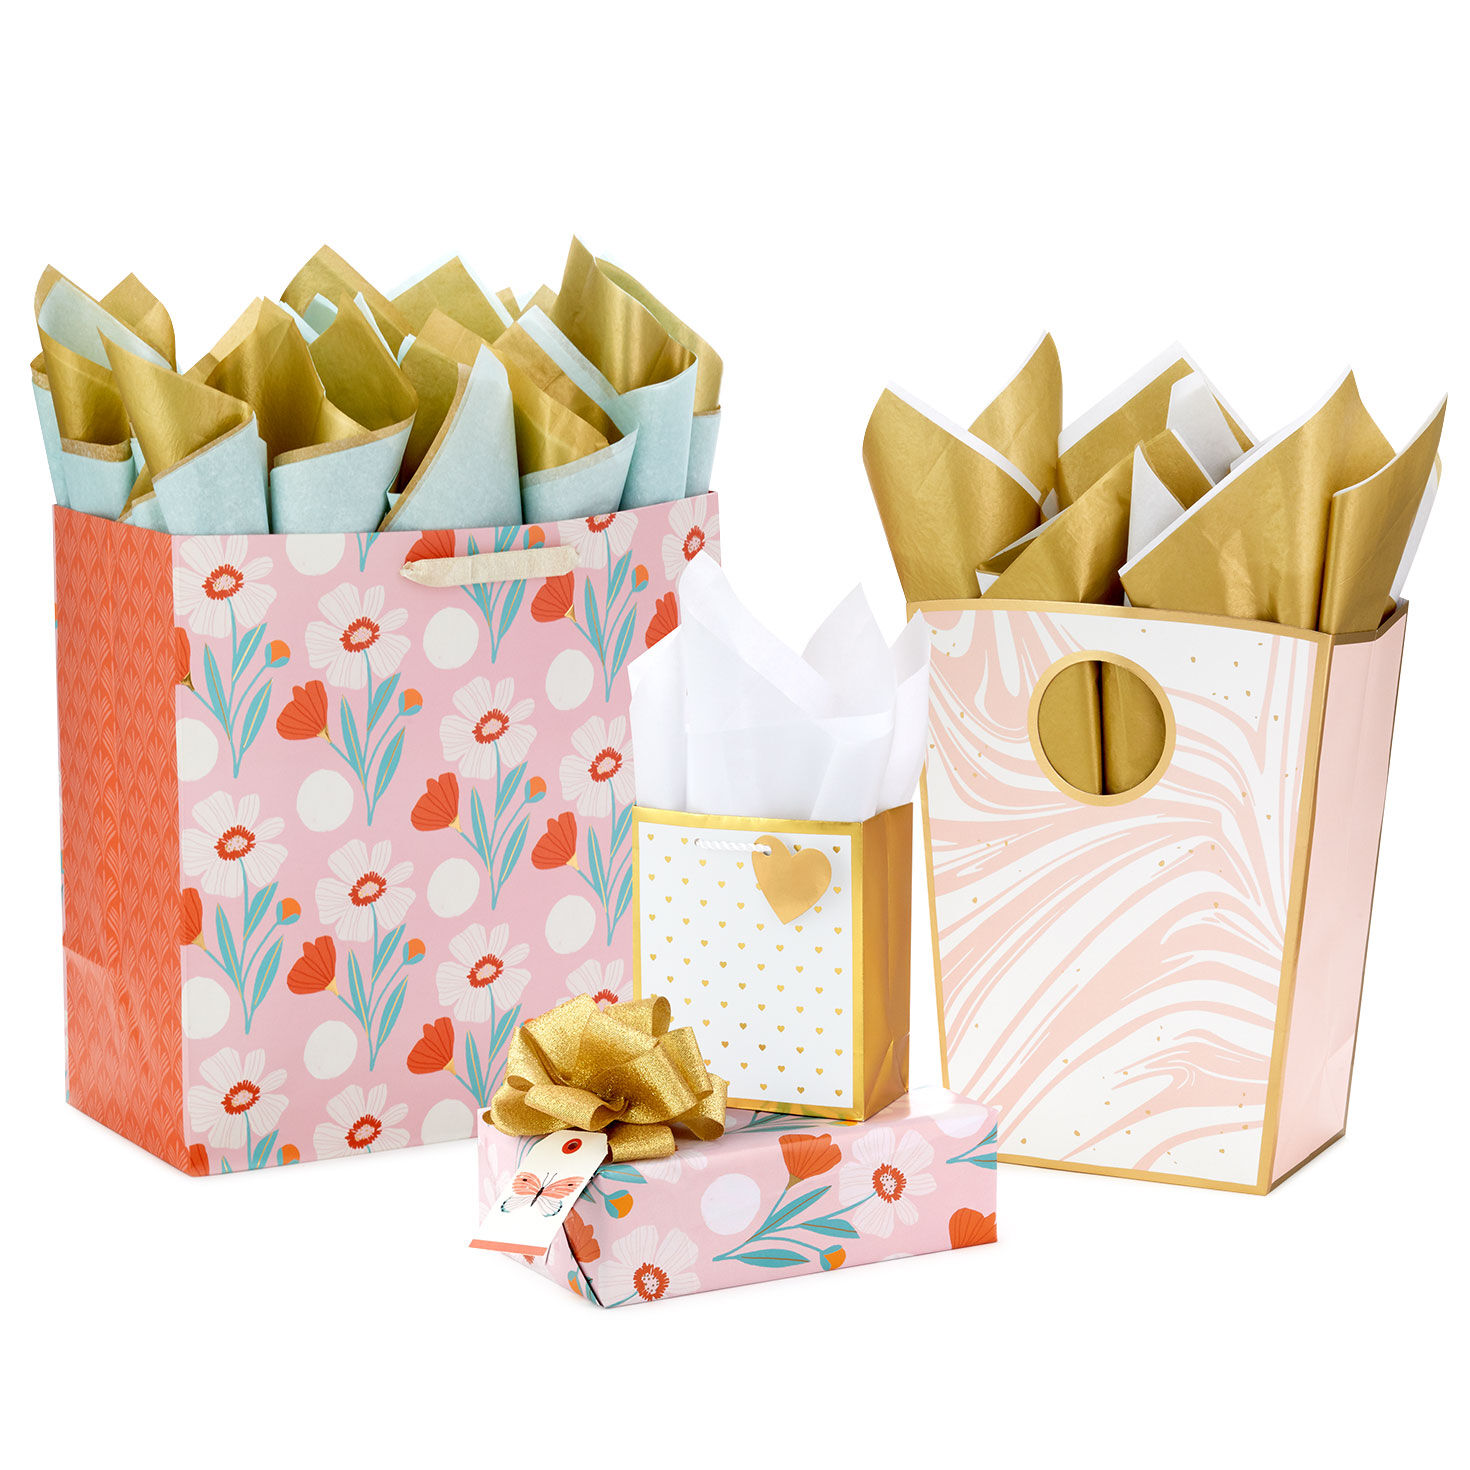 Gift Bags Medium Size with Handles Glitter Colorful Paper Bags with Tissue Paper for Shopping Mother's Day- 4 Pack-7 X 4 X 9 Wedding Parties Baby Shower 